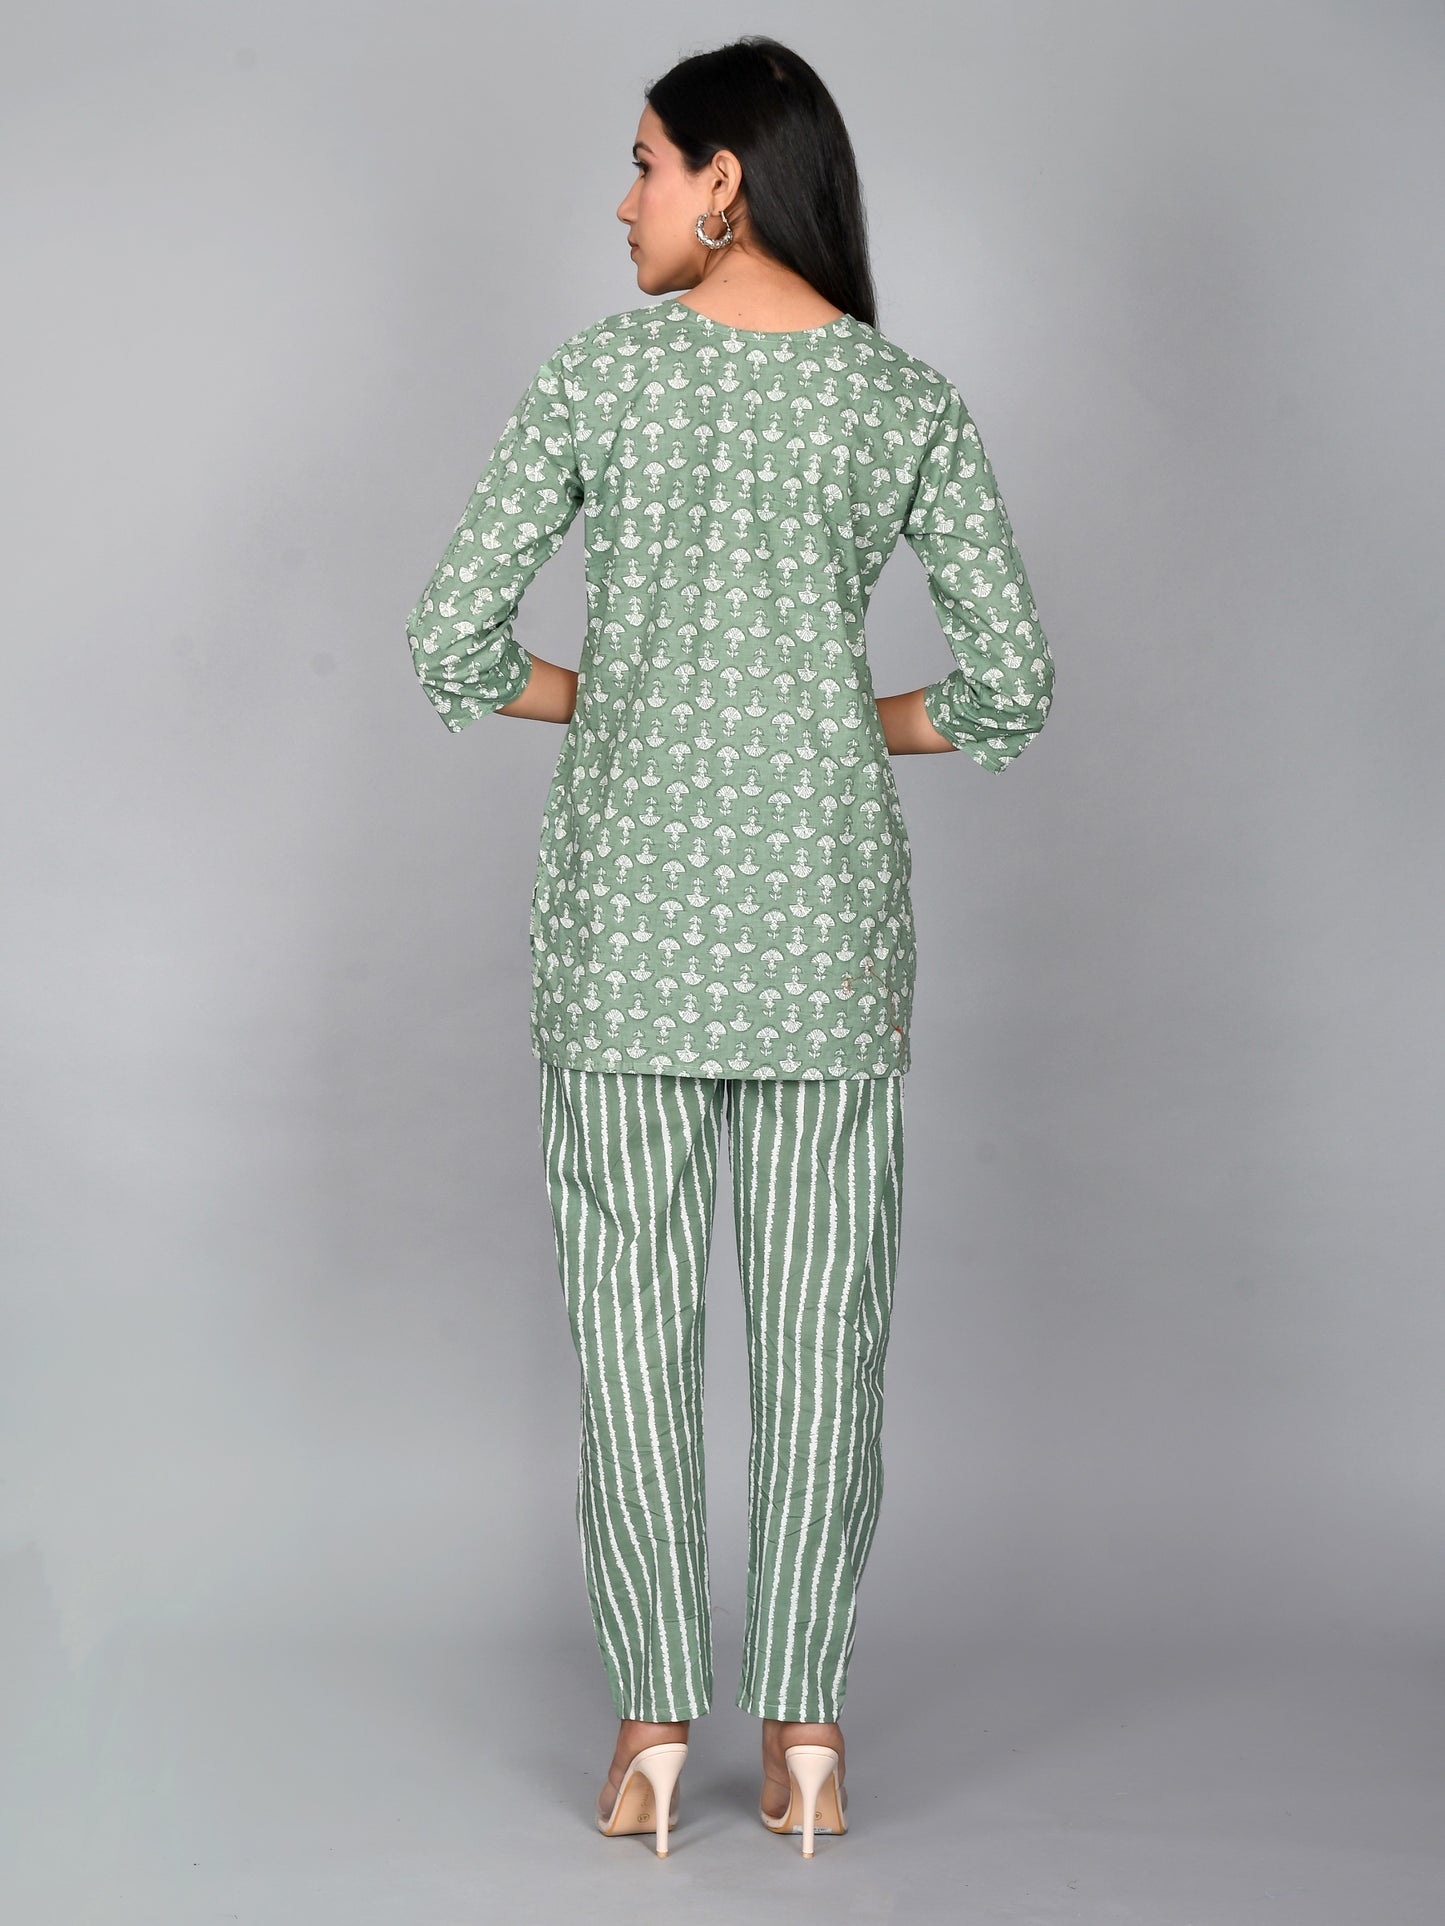 Shop This night suit is designed for both comfort and style. Made with pure cotton, it provides softness and breathability. The beautiful floral print adds a touch of elegance. Perfect for women and girls, this night suit offers a comfortable and stylish sleepwear option.